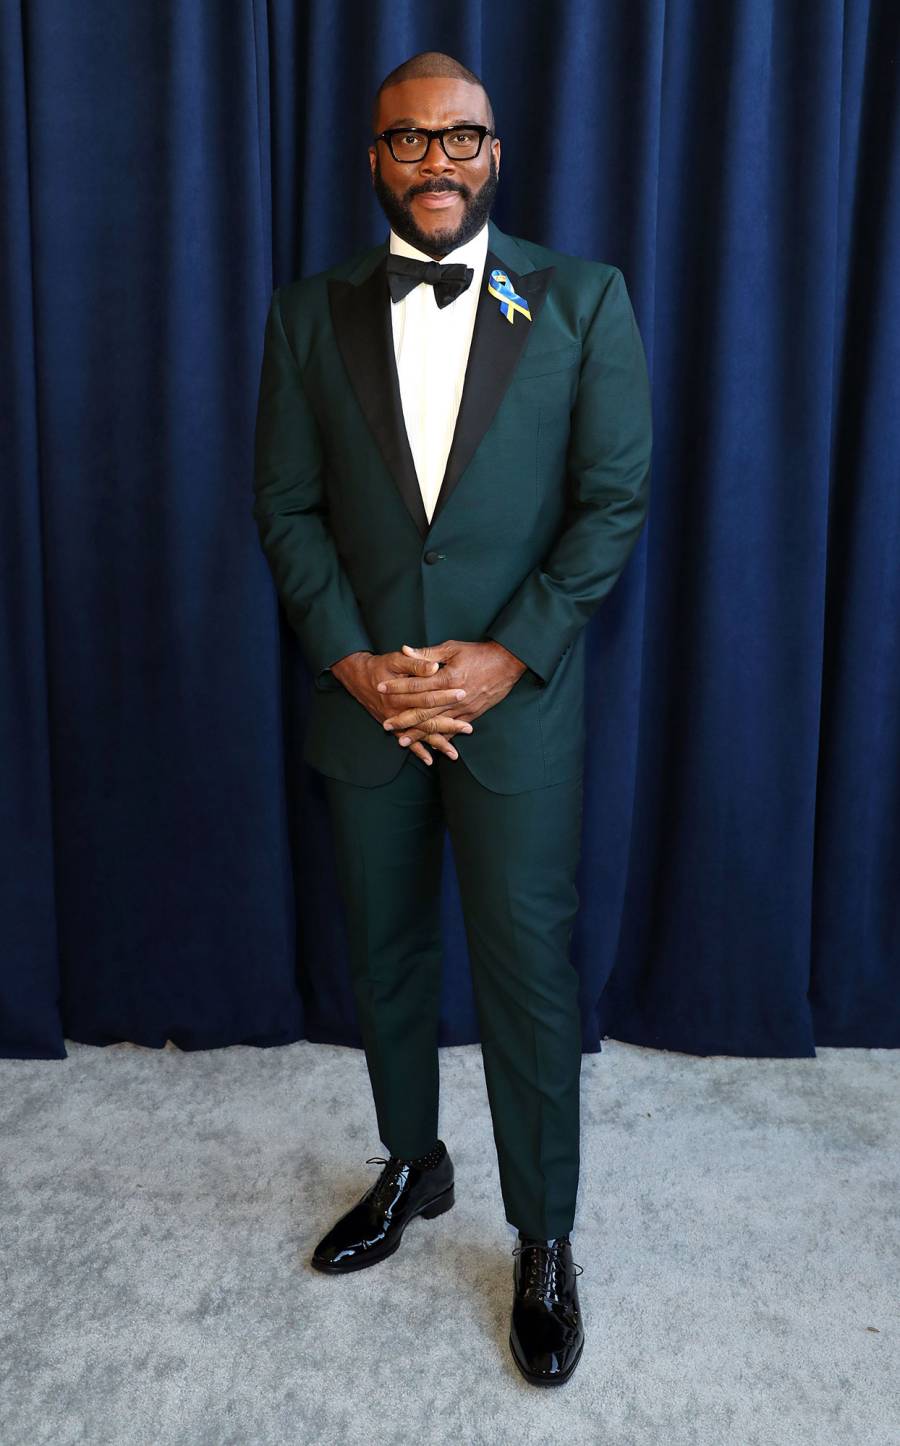 Tyler Perry The Best Dressed Hottest Men at the 2022 SAG Awards